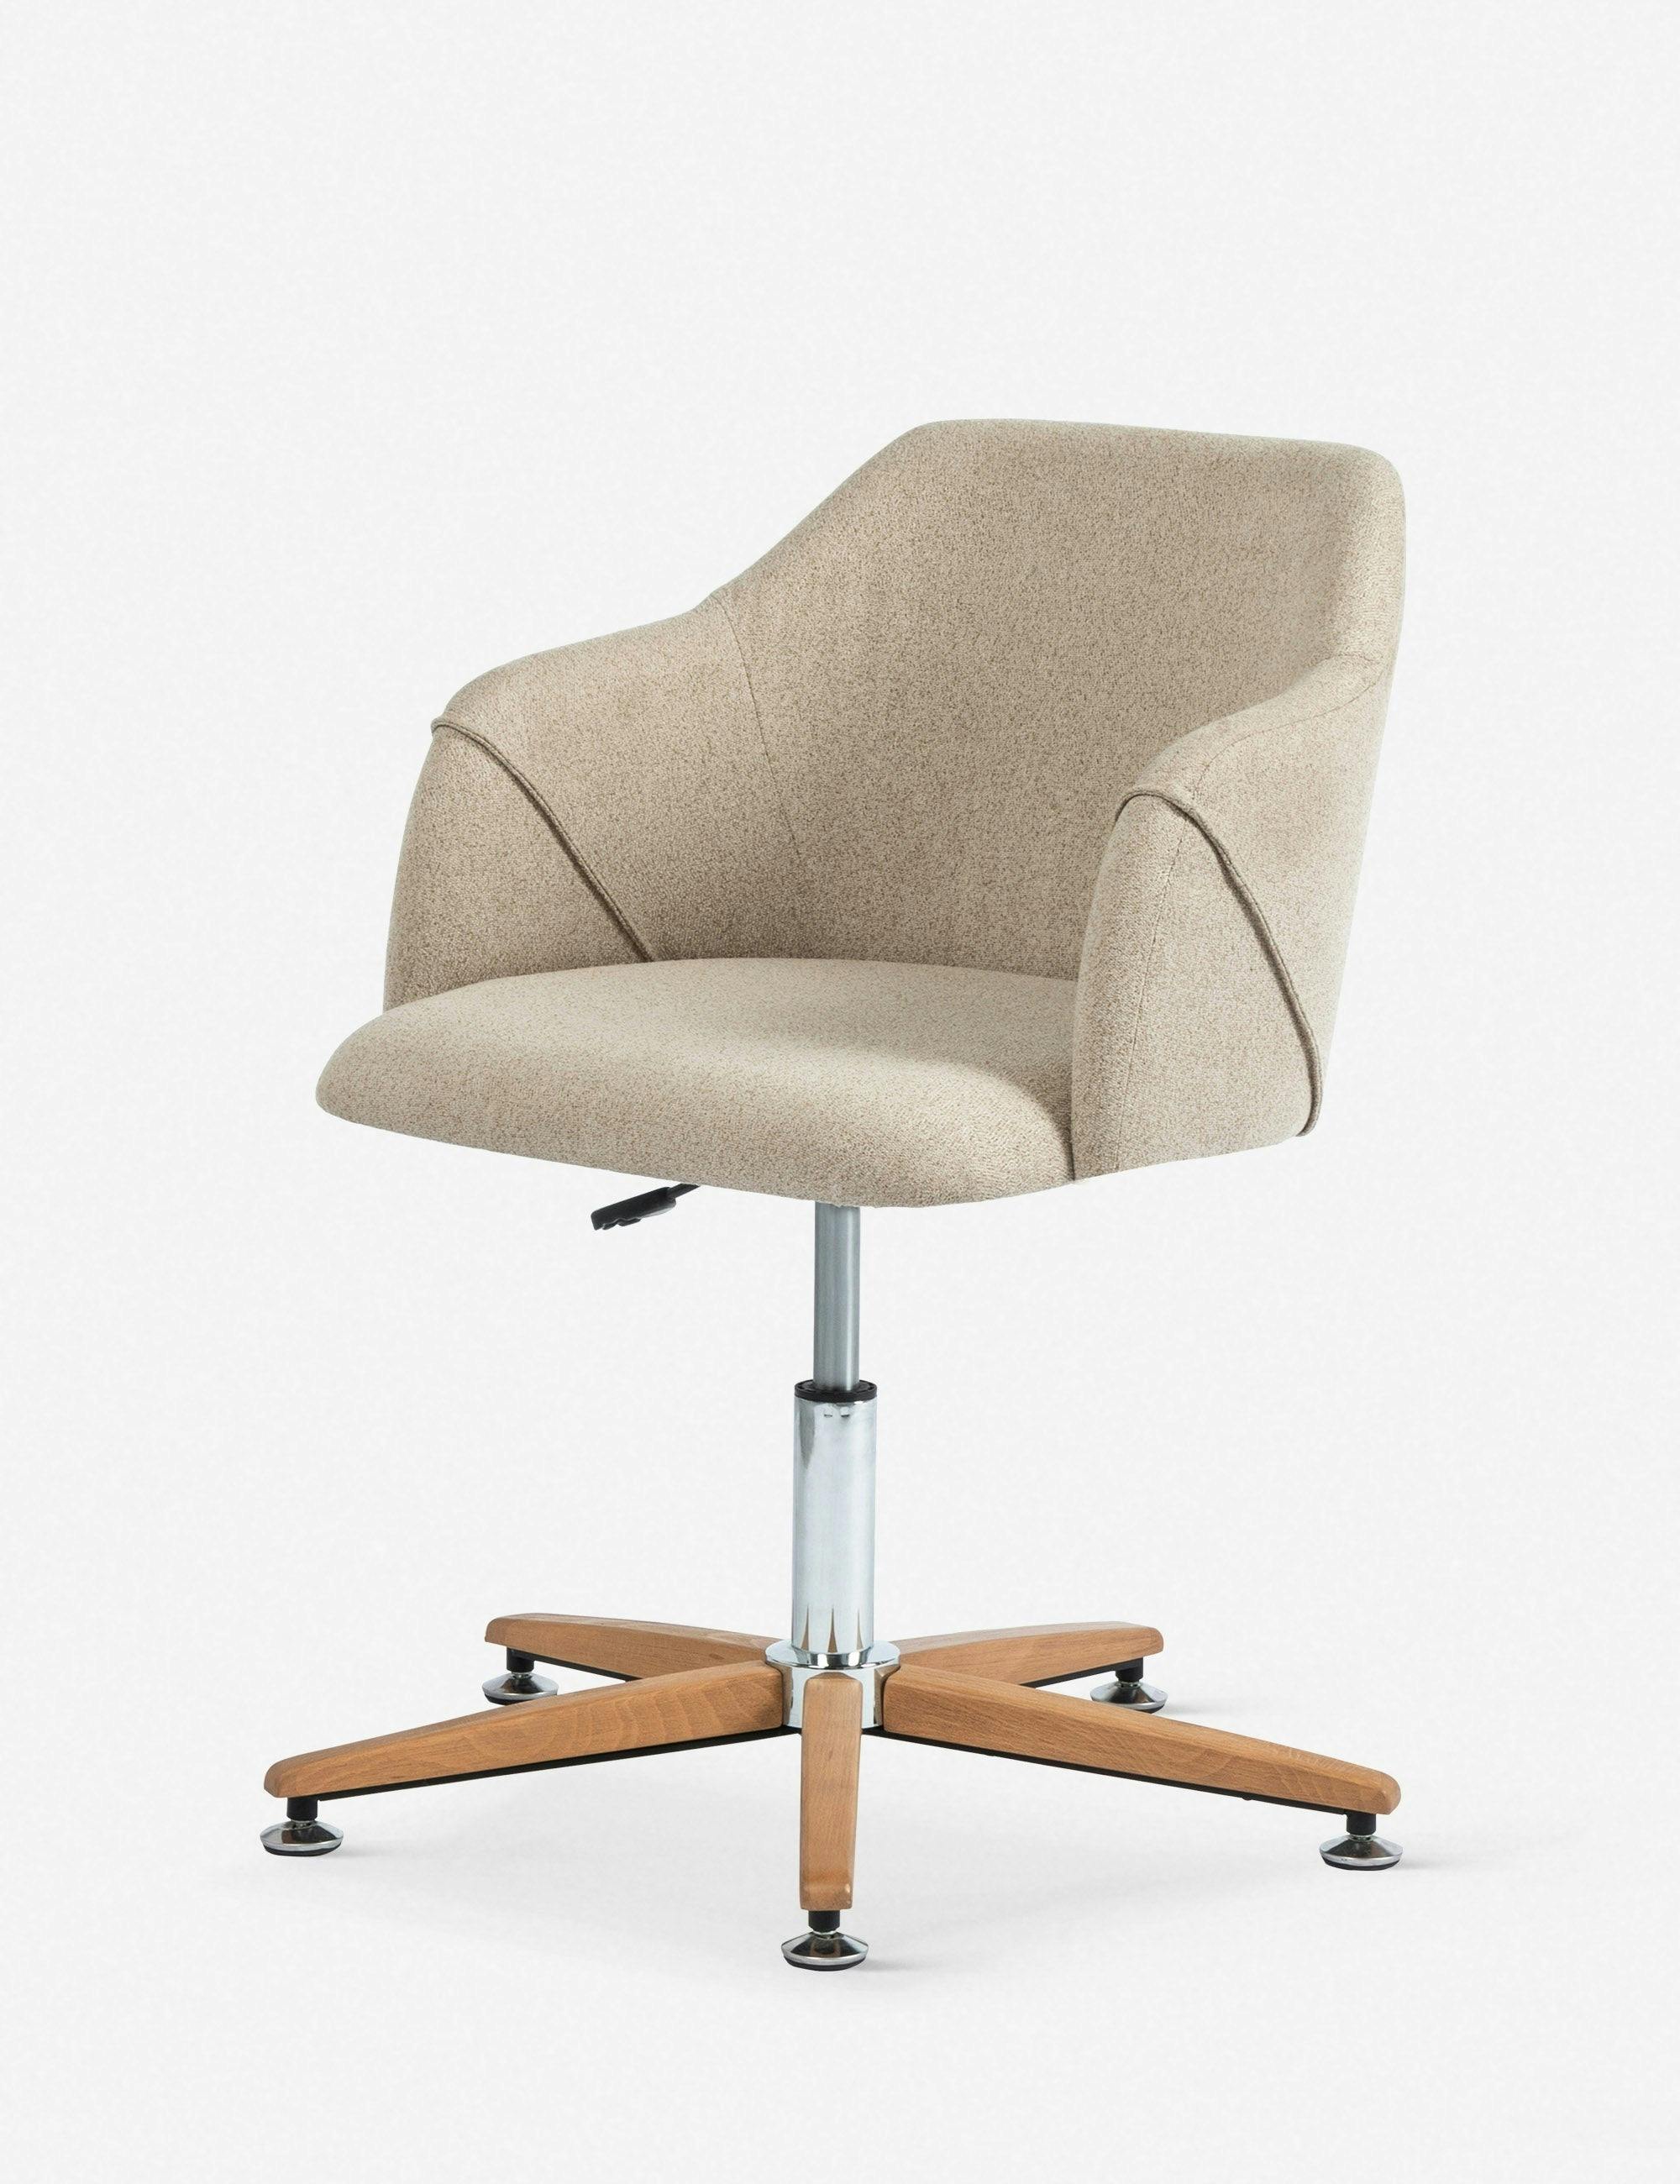 Edna Fedora Oatmeal Adjustable Swivel Task Chair in Brown Leather